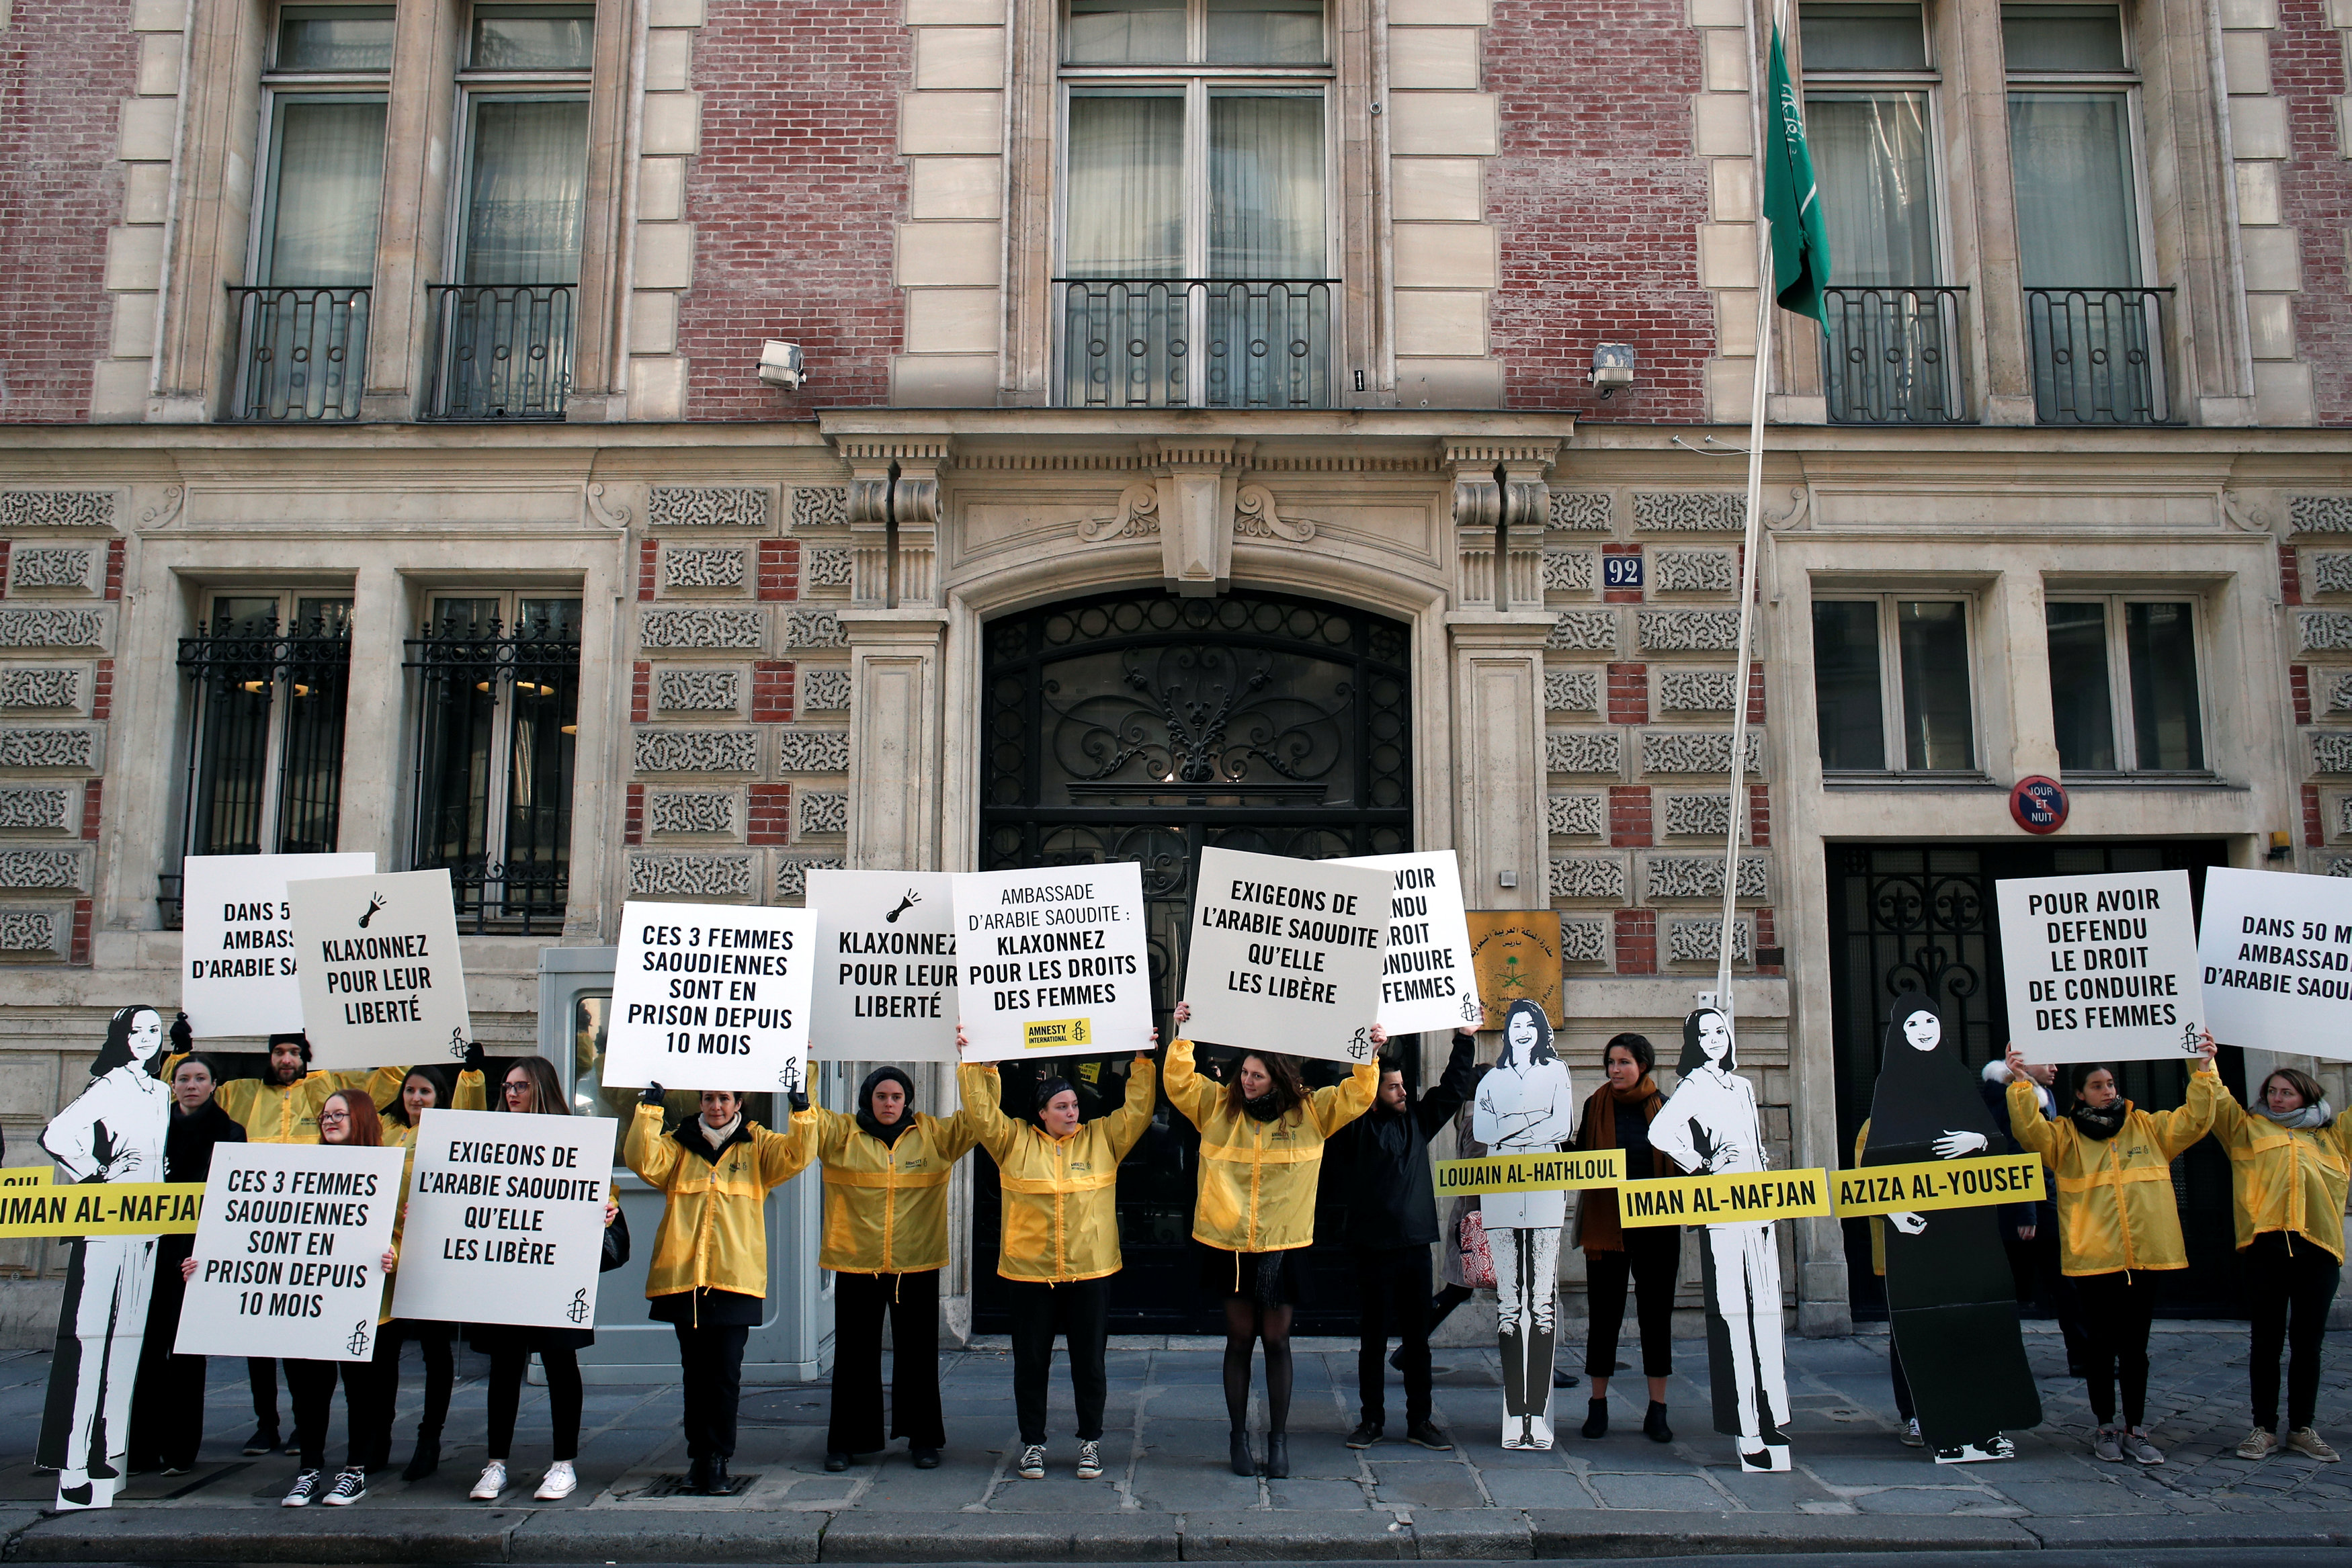 Demonstrators from Amnesty International hold placards outside the Saudi Arabian Embassy on International Women's day in Paris, France, March 8, 2019